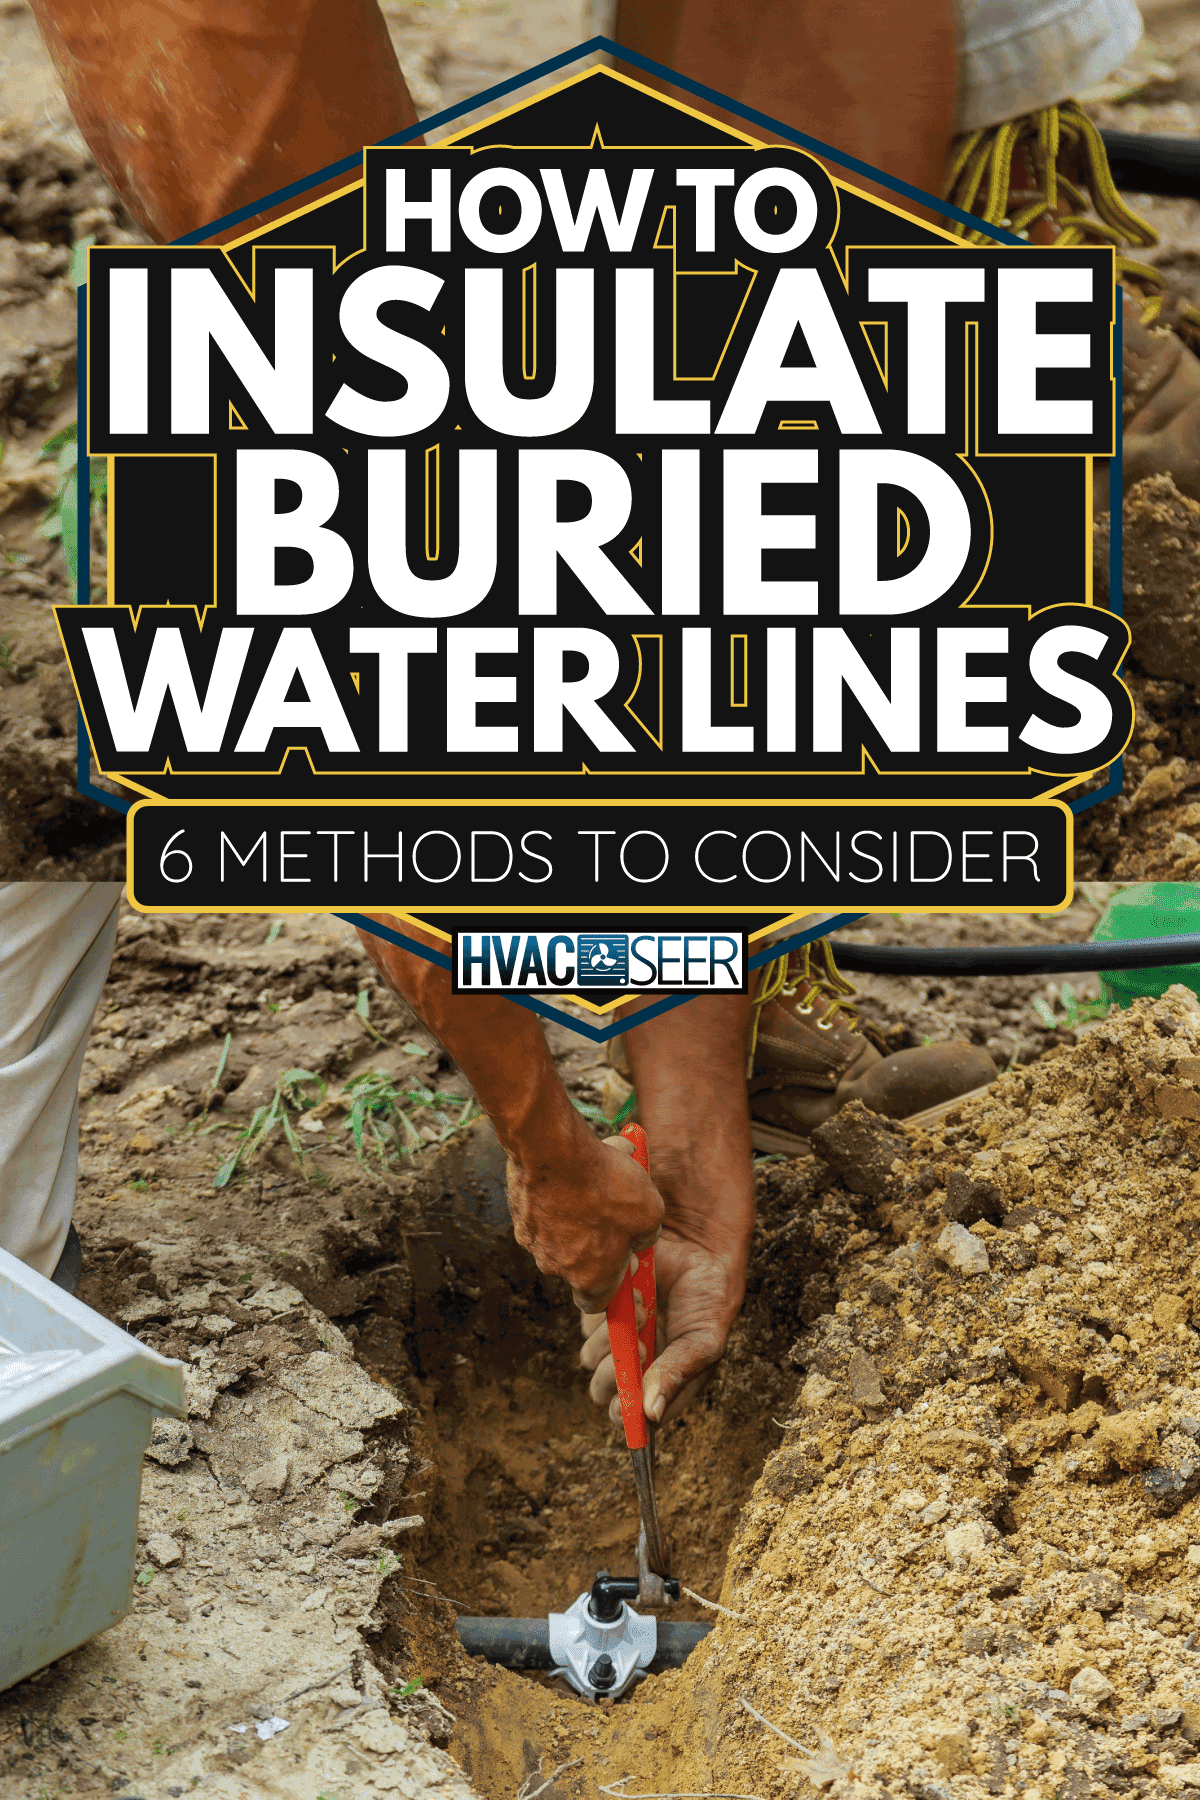 Underground Sprinkler System to Water the Yard Man Working with Pipes in Ground. How To Insulate Buried Water Lines—6 Methods To Consider